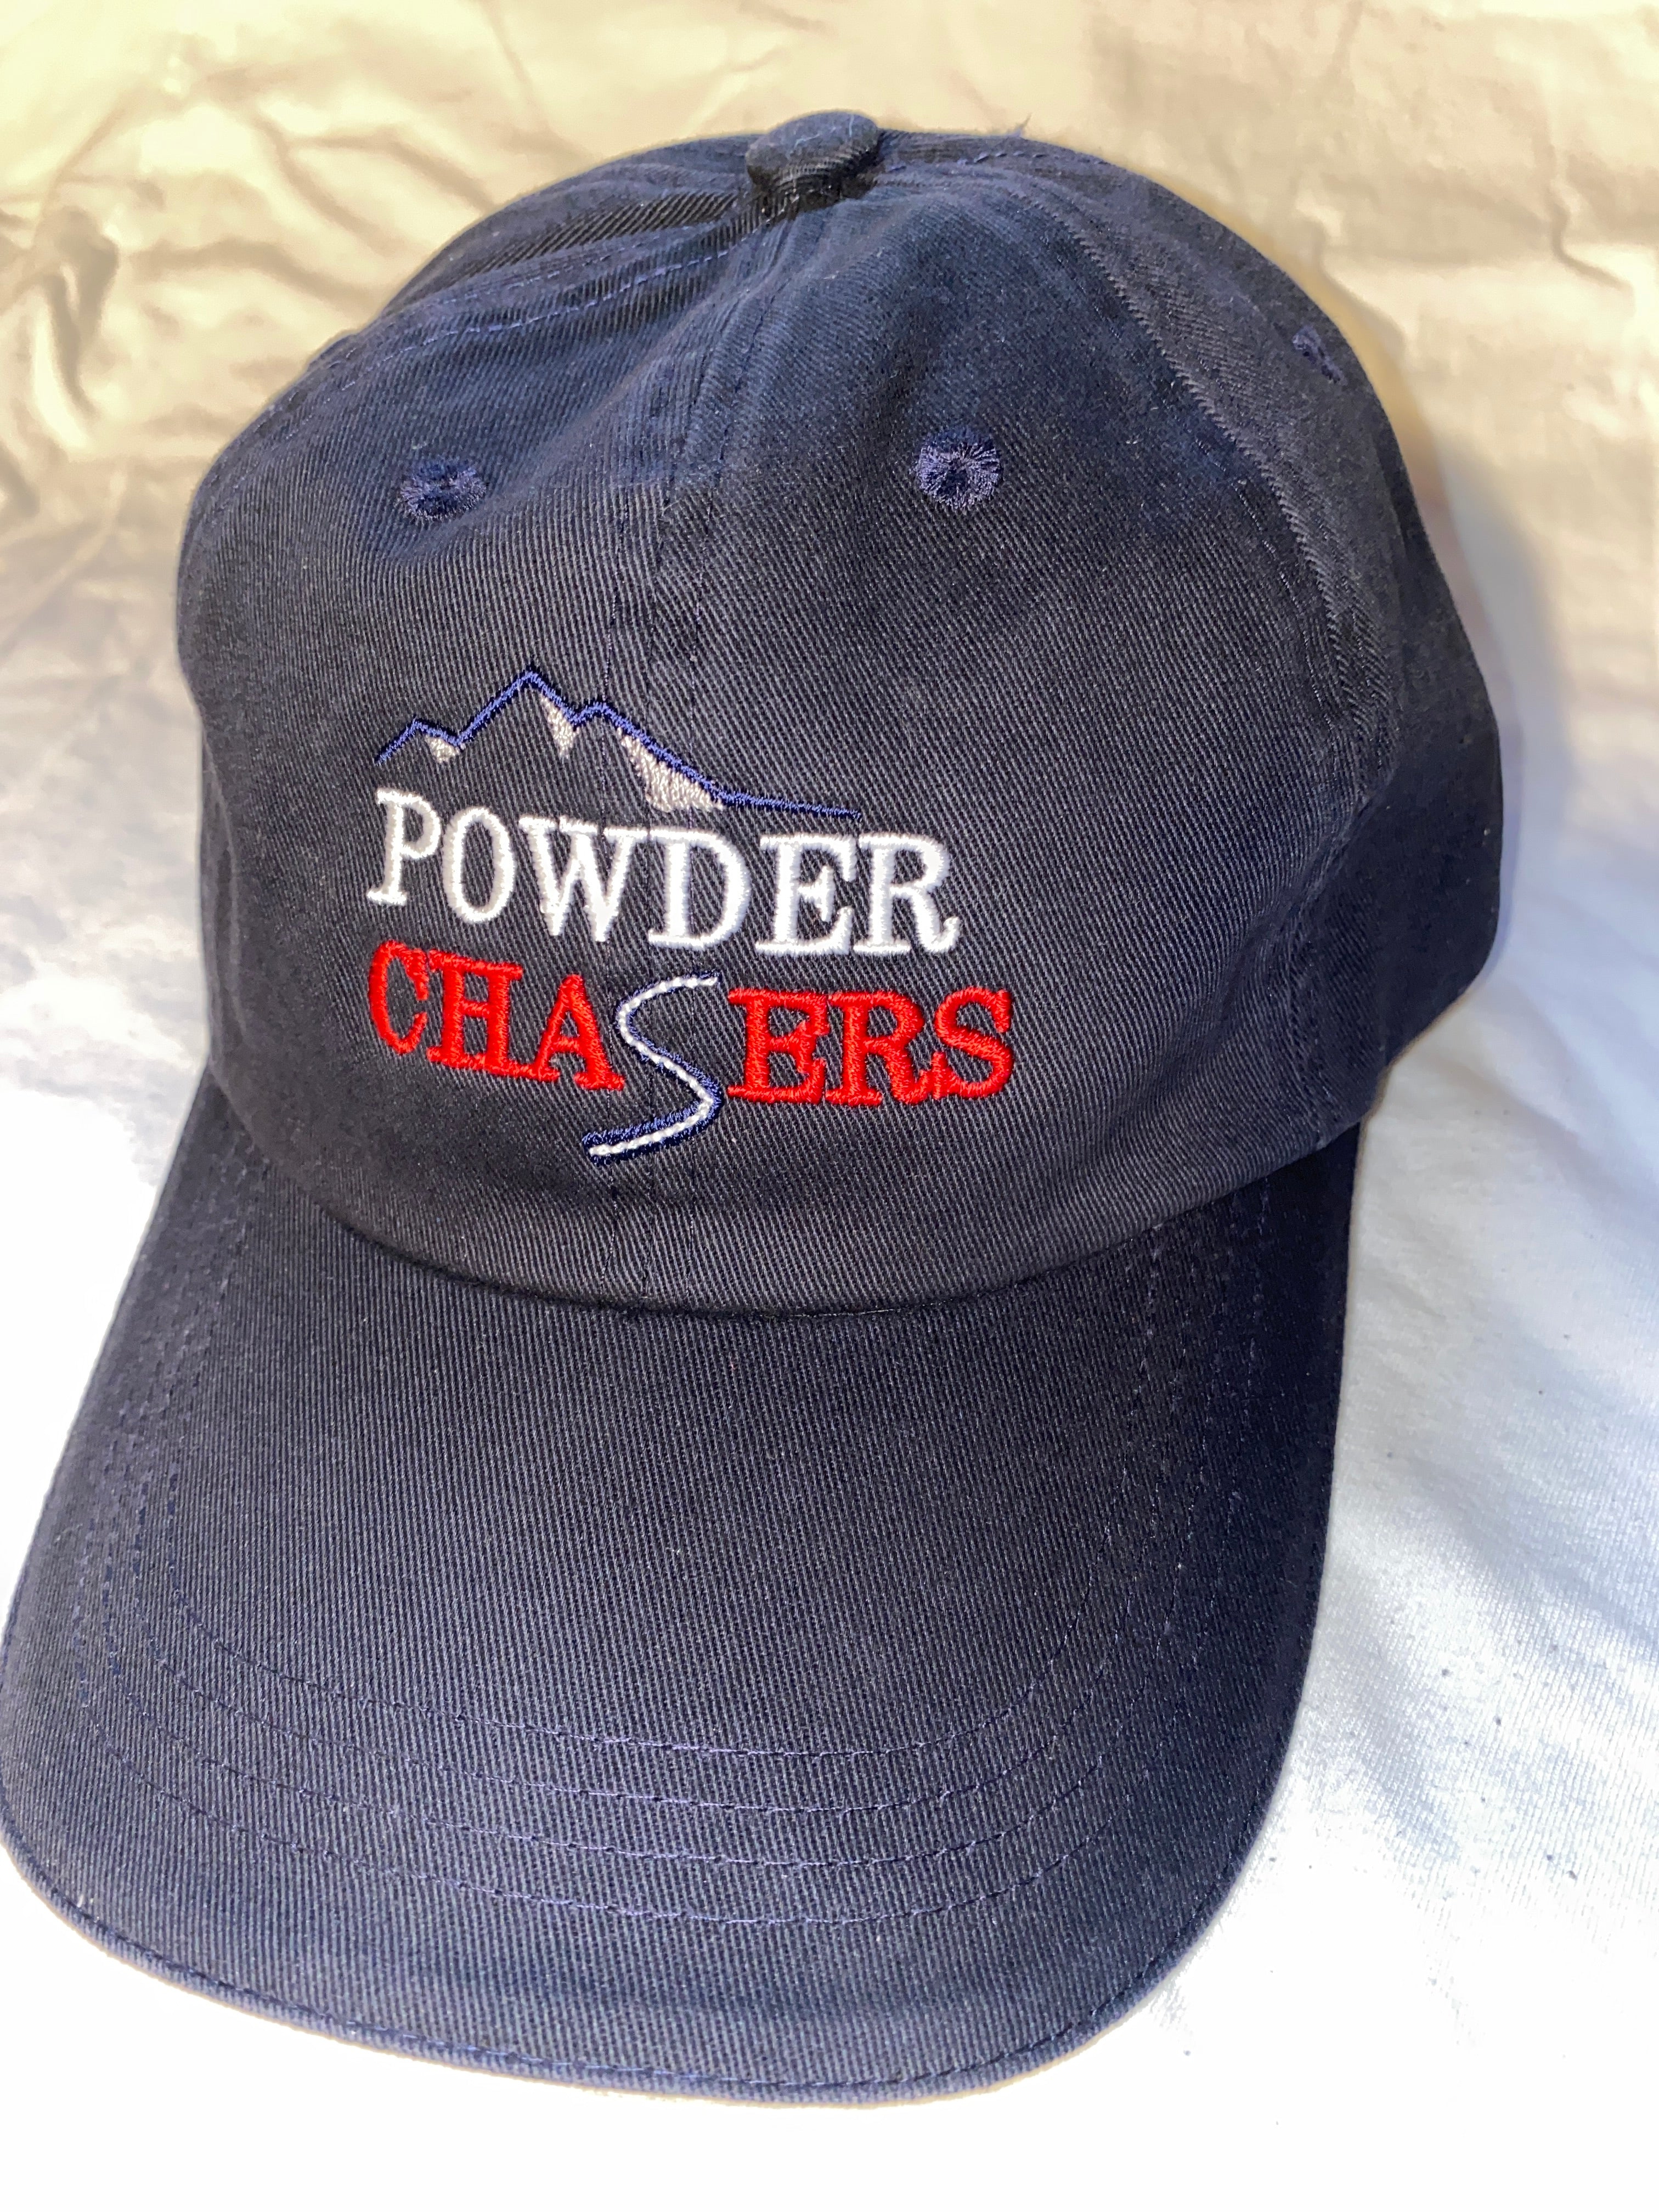 Powderchasers Embroidered Baseball Cap